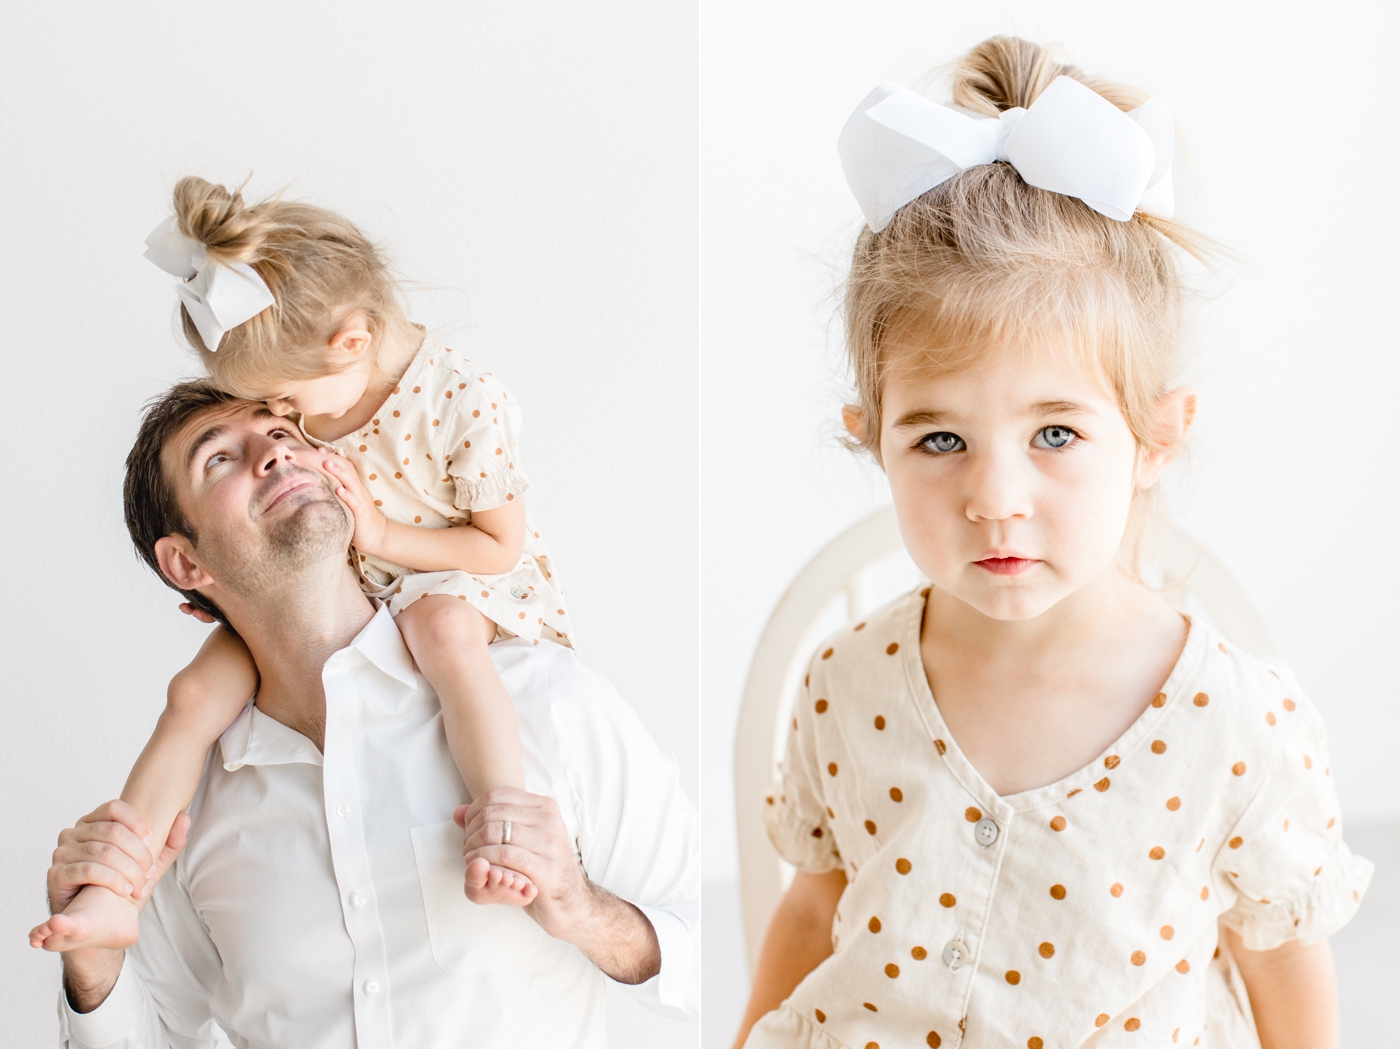 Playful image of little girl on Dad's shoulders. Photos by Sana Ahmed Photography.